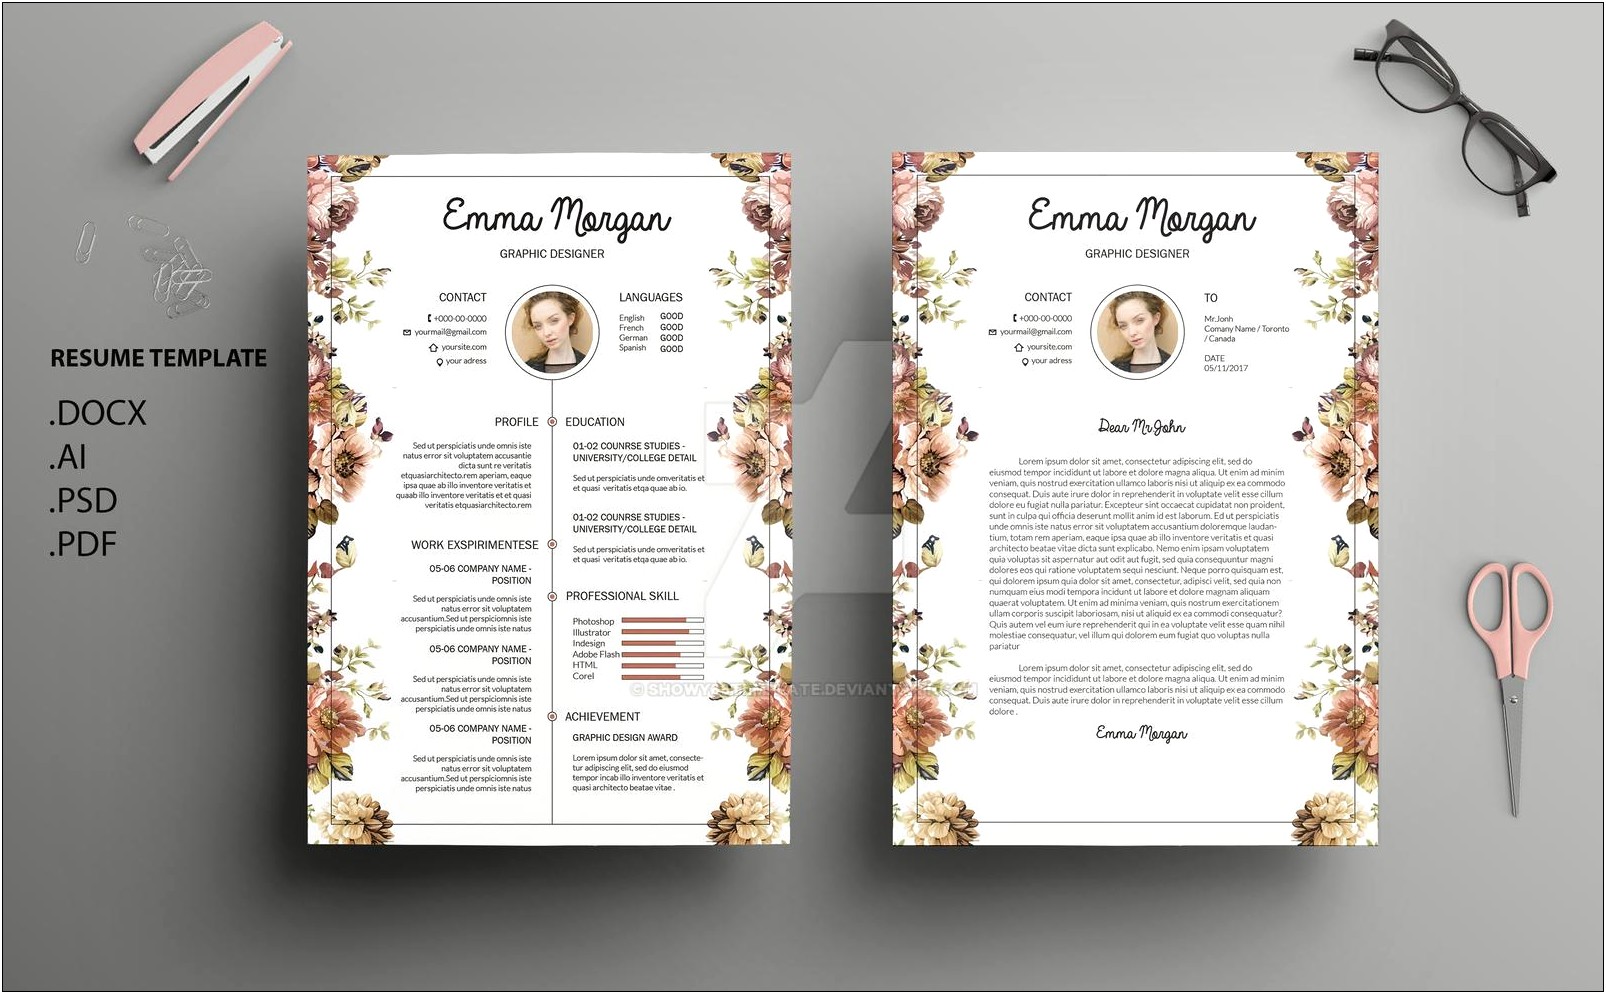 Resume And Cover Letter Layout Side By Side